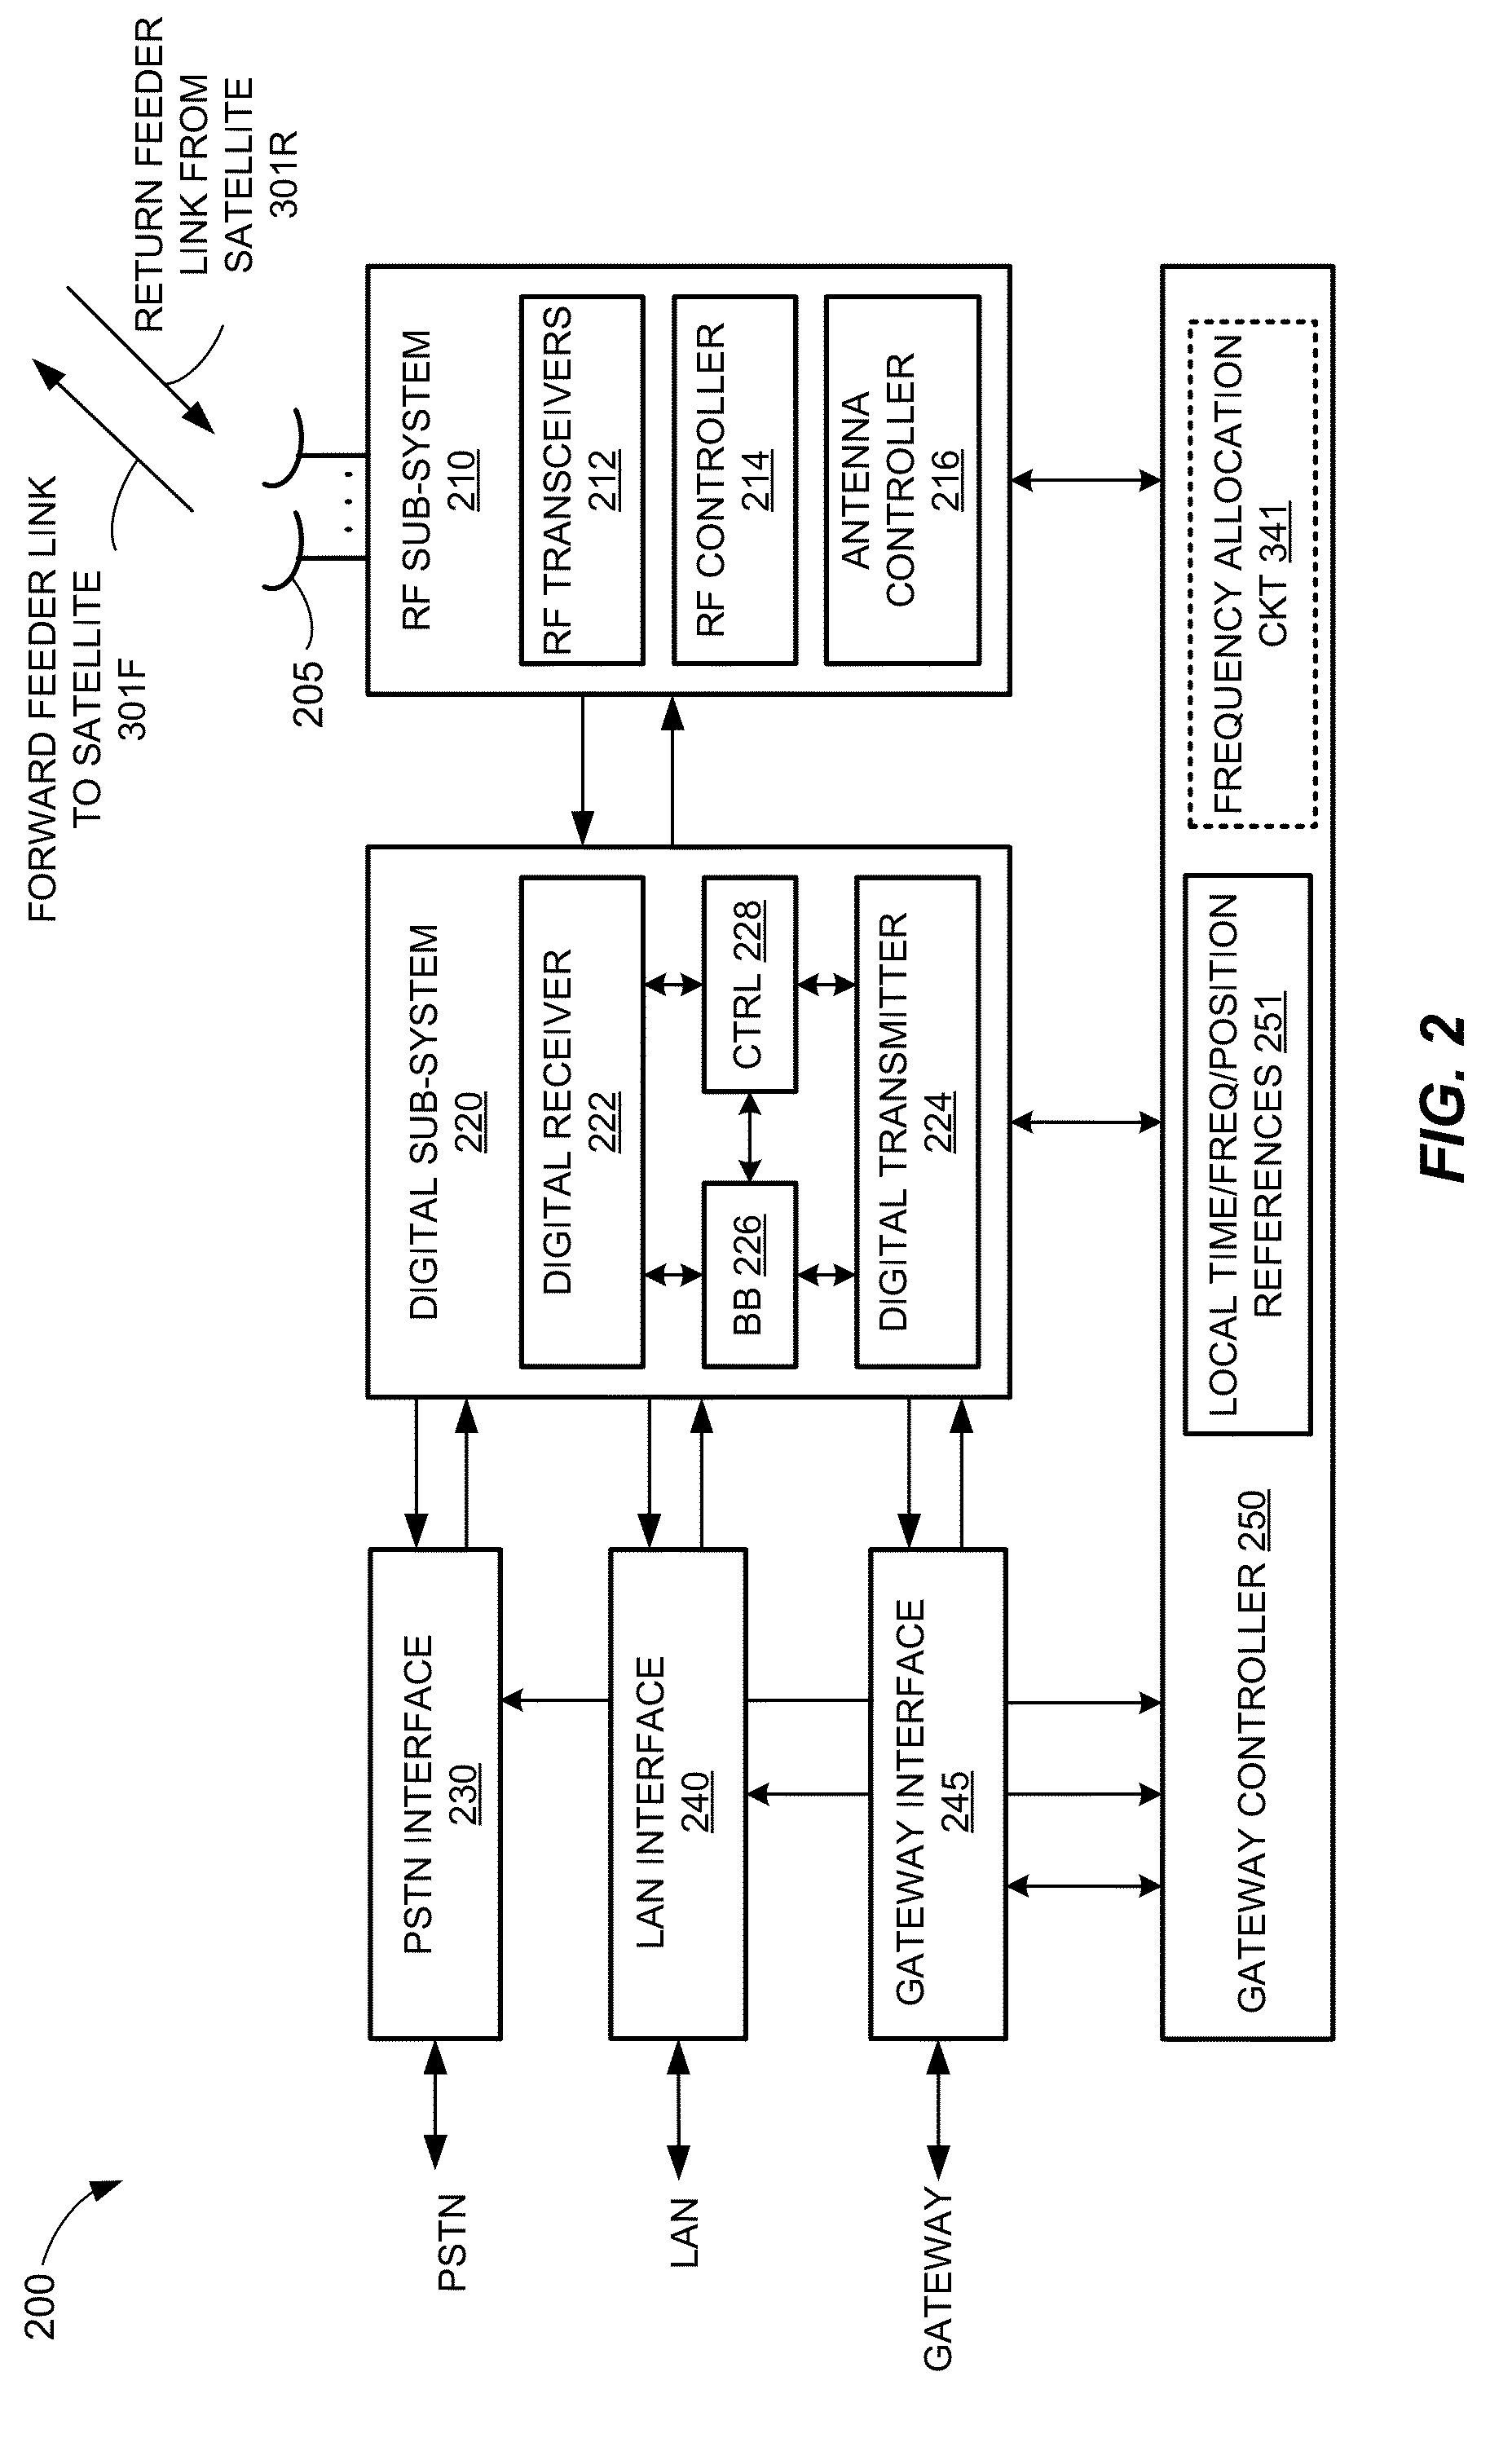 Dynamic frequency allocation of satellite beams